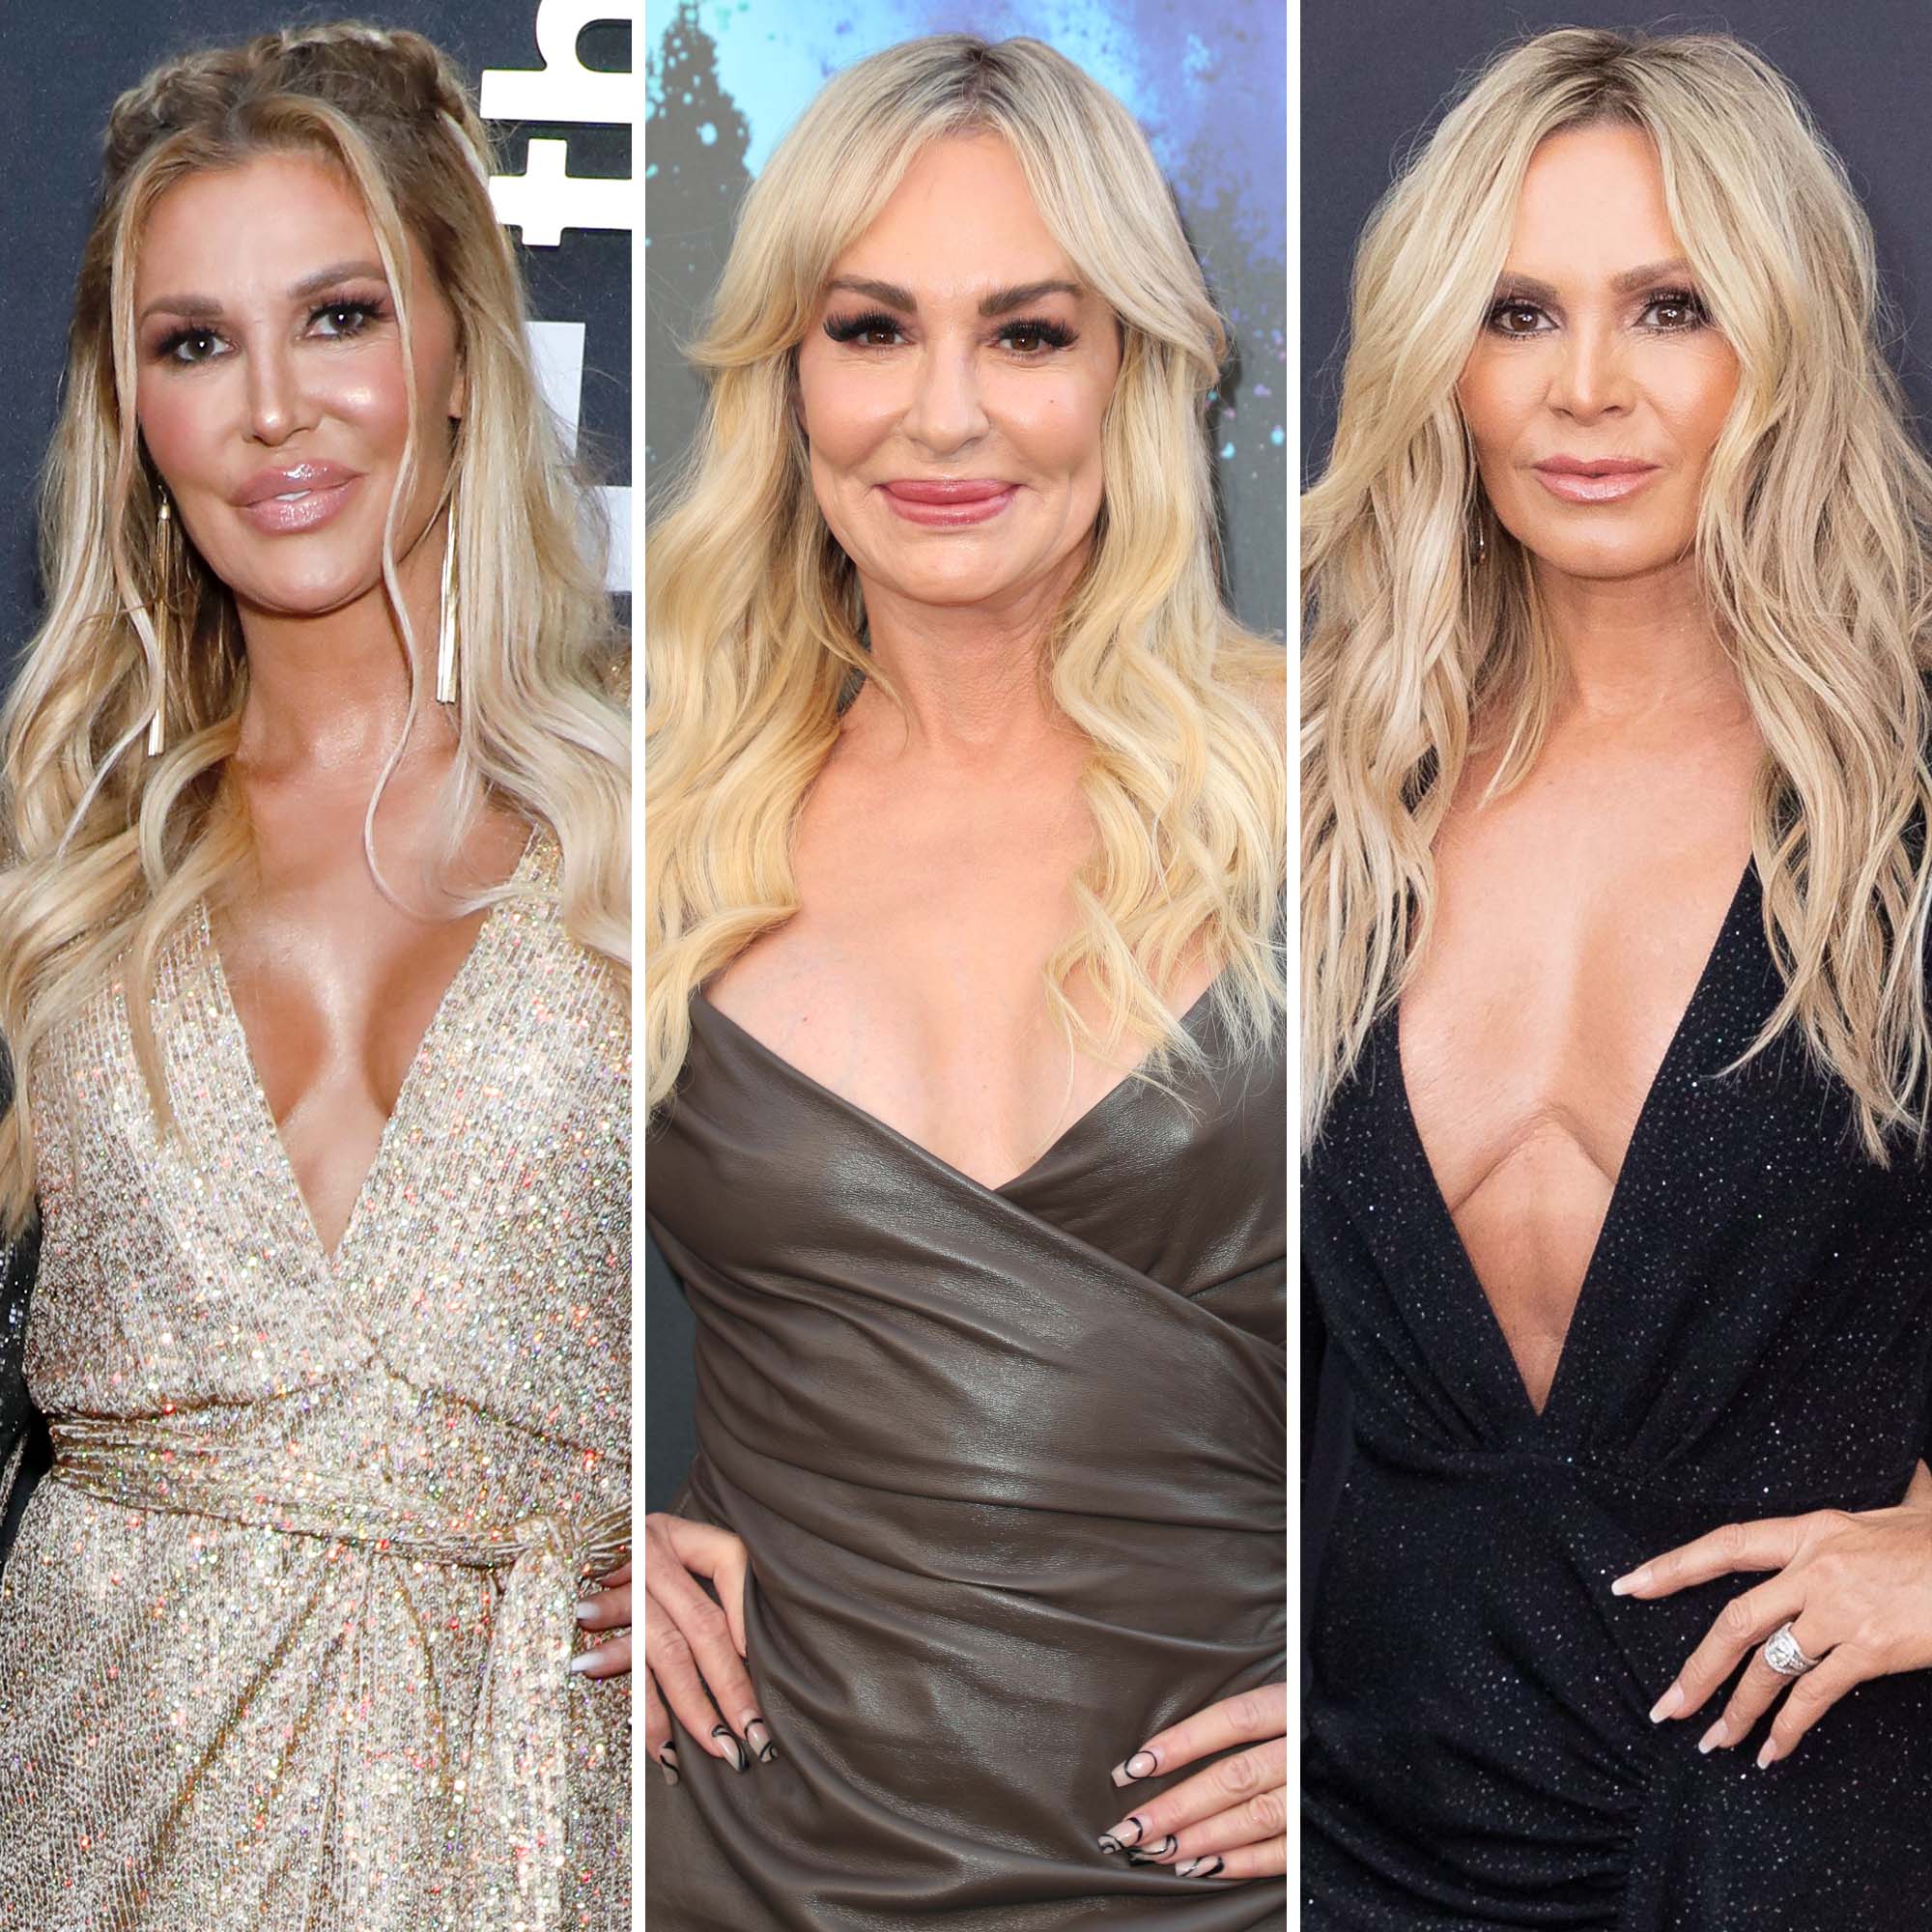 Brandi Glanvilles Feuds With Taylor Armstrong, Tamra Judge Explained